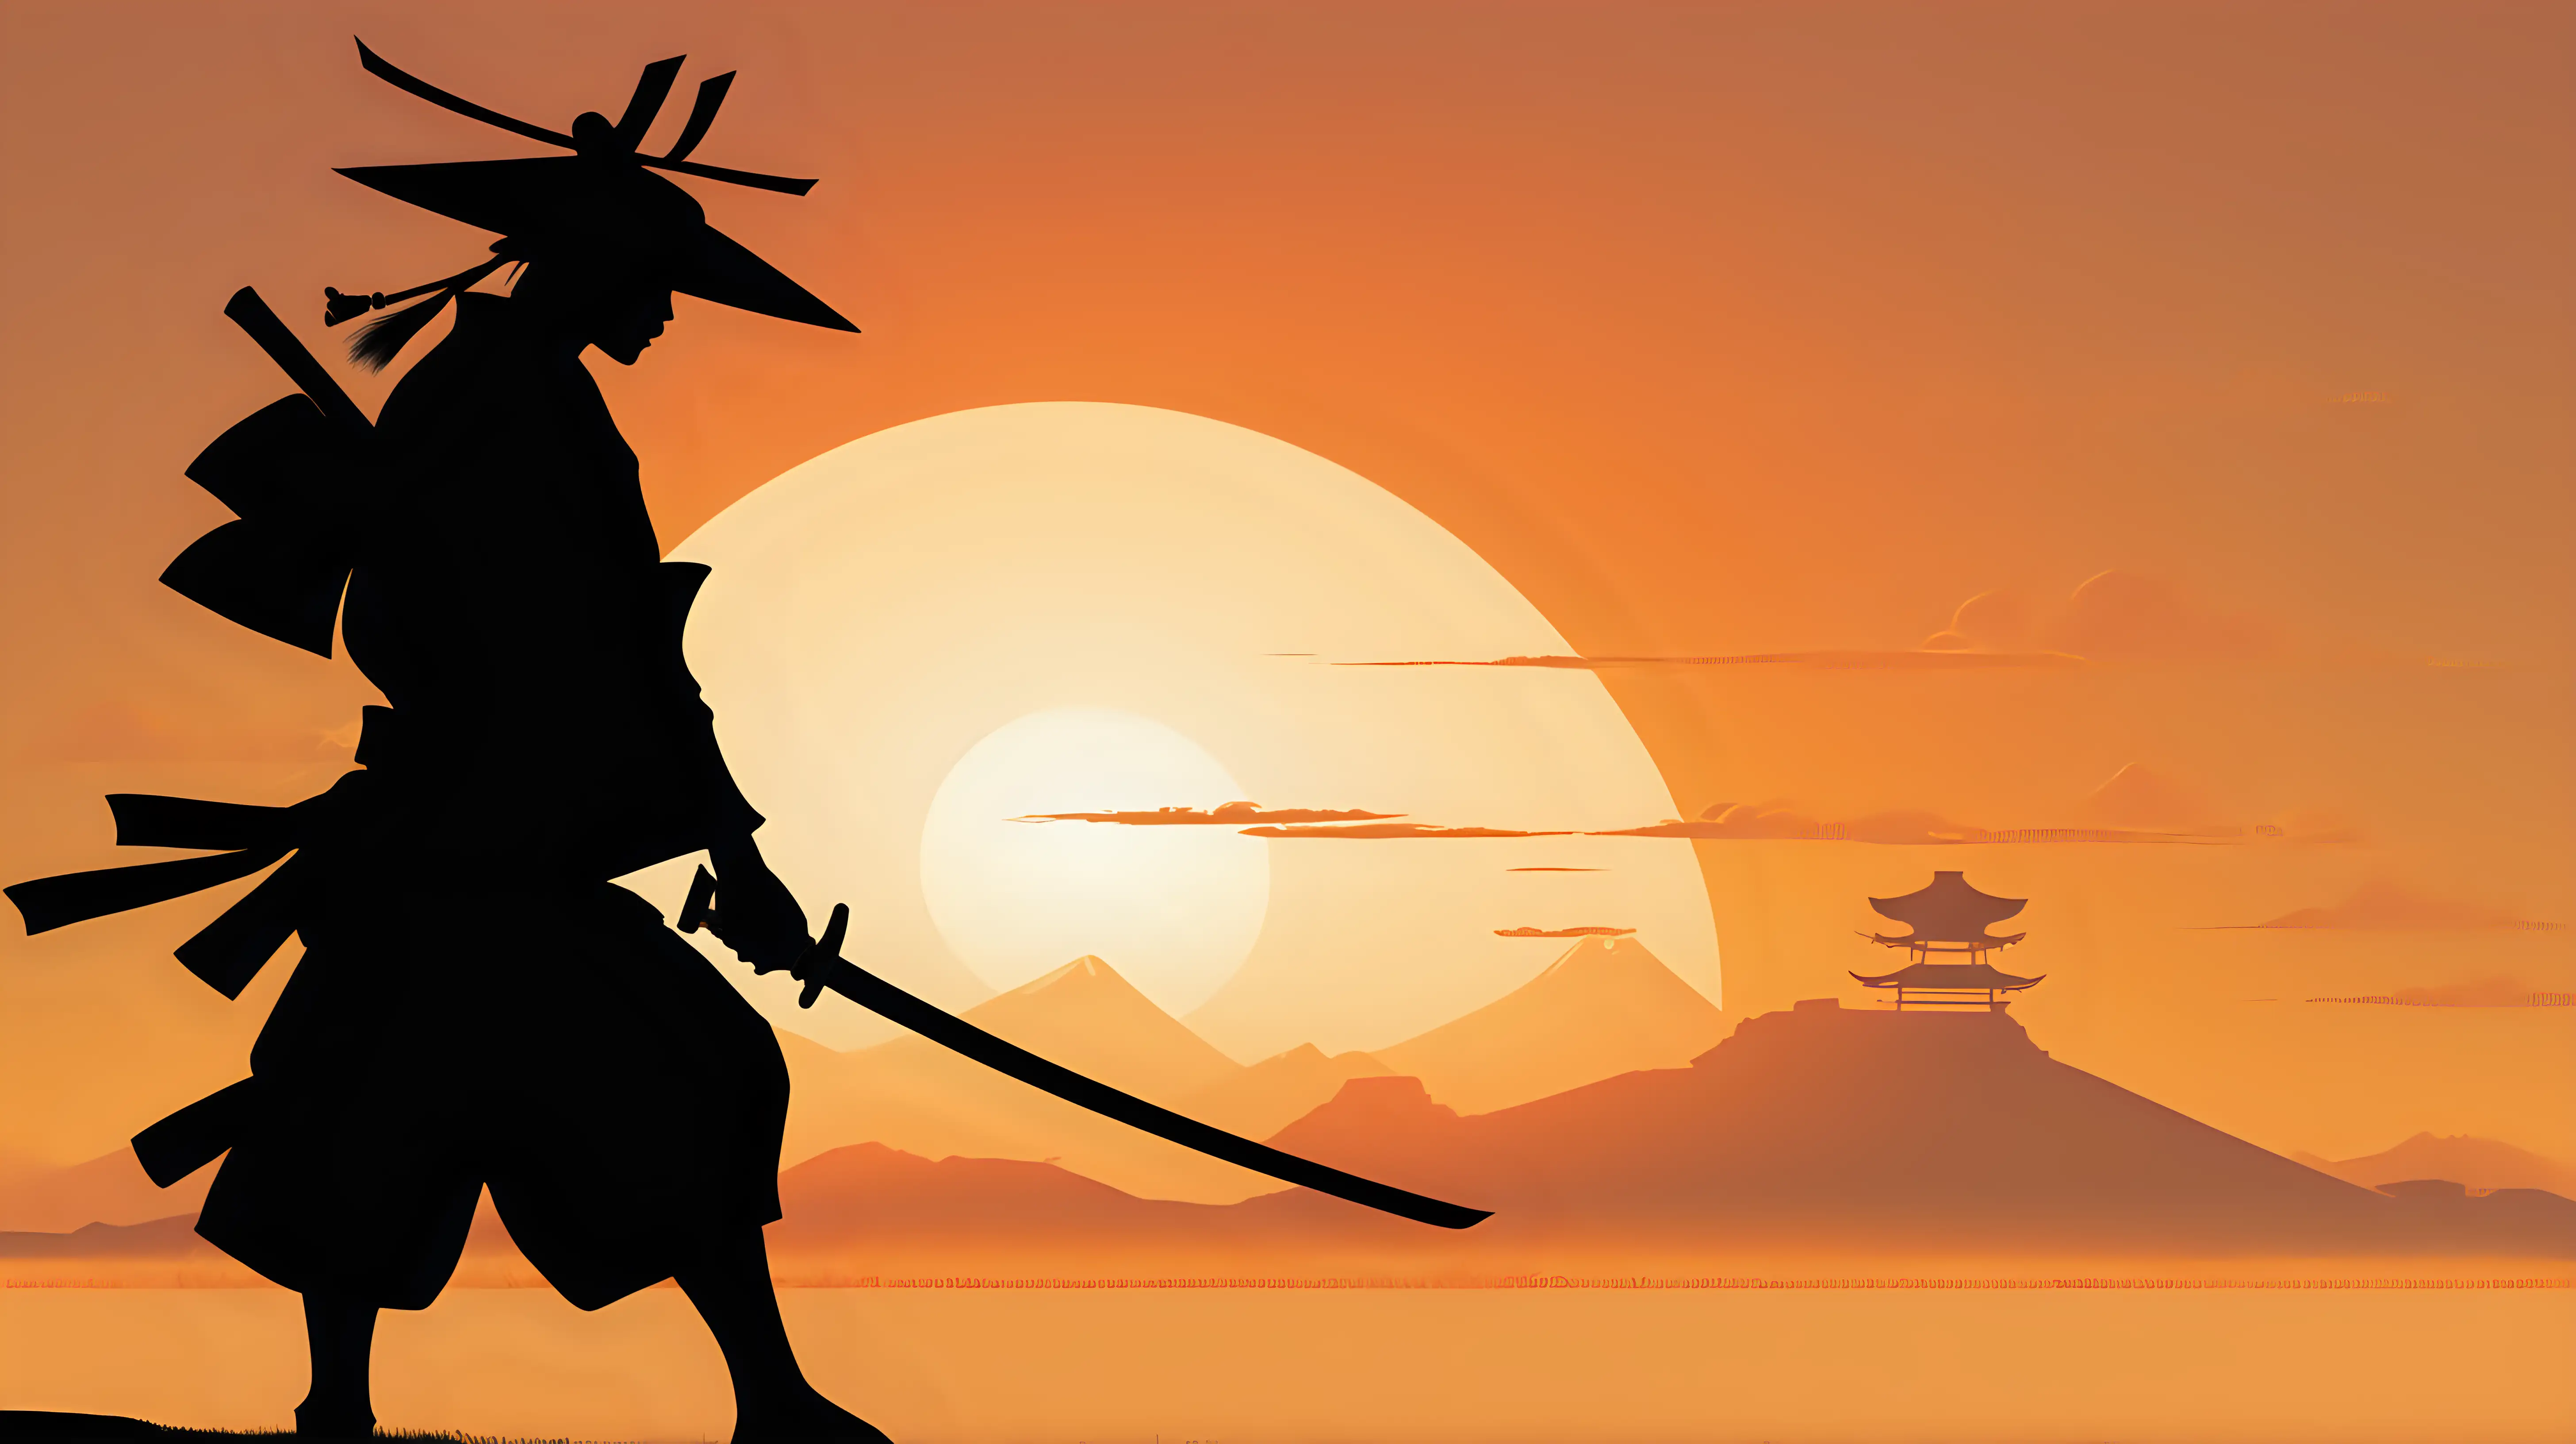 A side profile of a samurai in mid-stride, his katana drawn and ready, his silhouette cutting a striking figure against the rising sun.